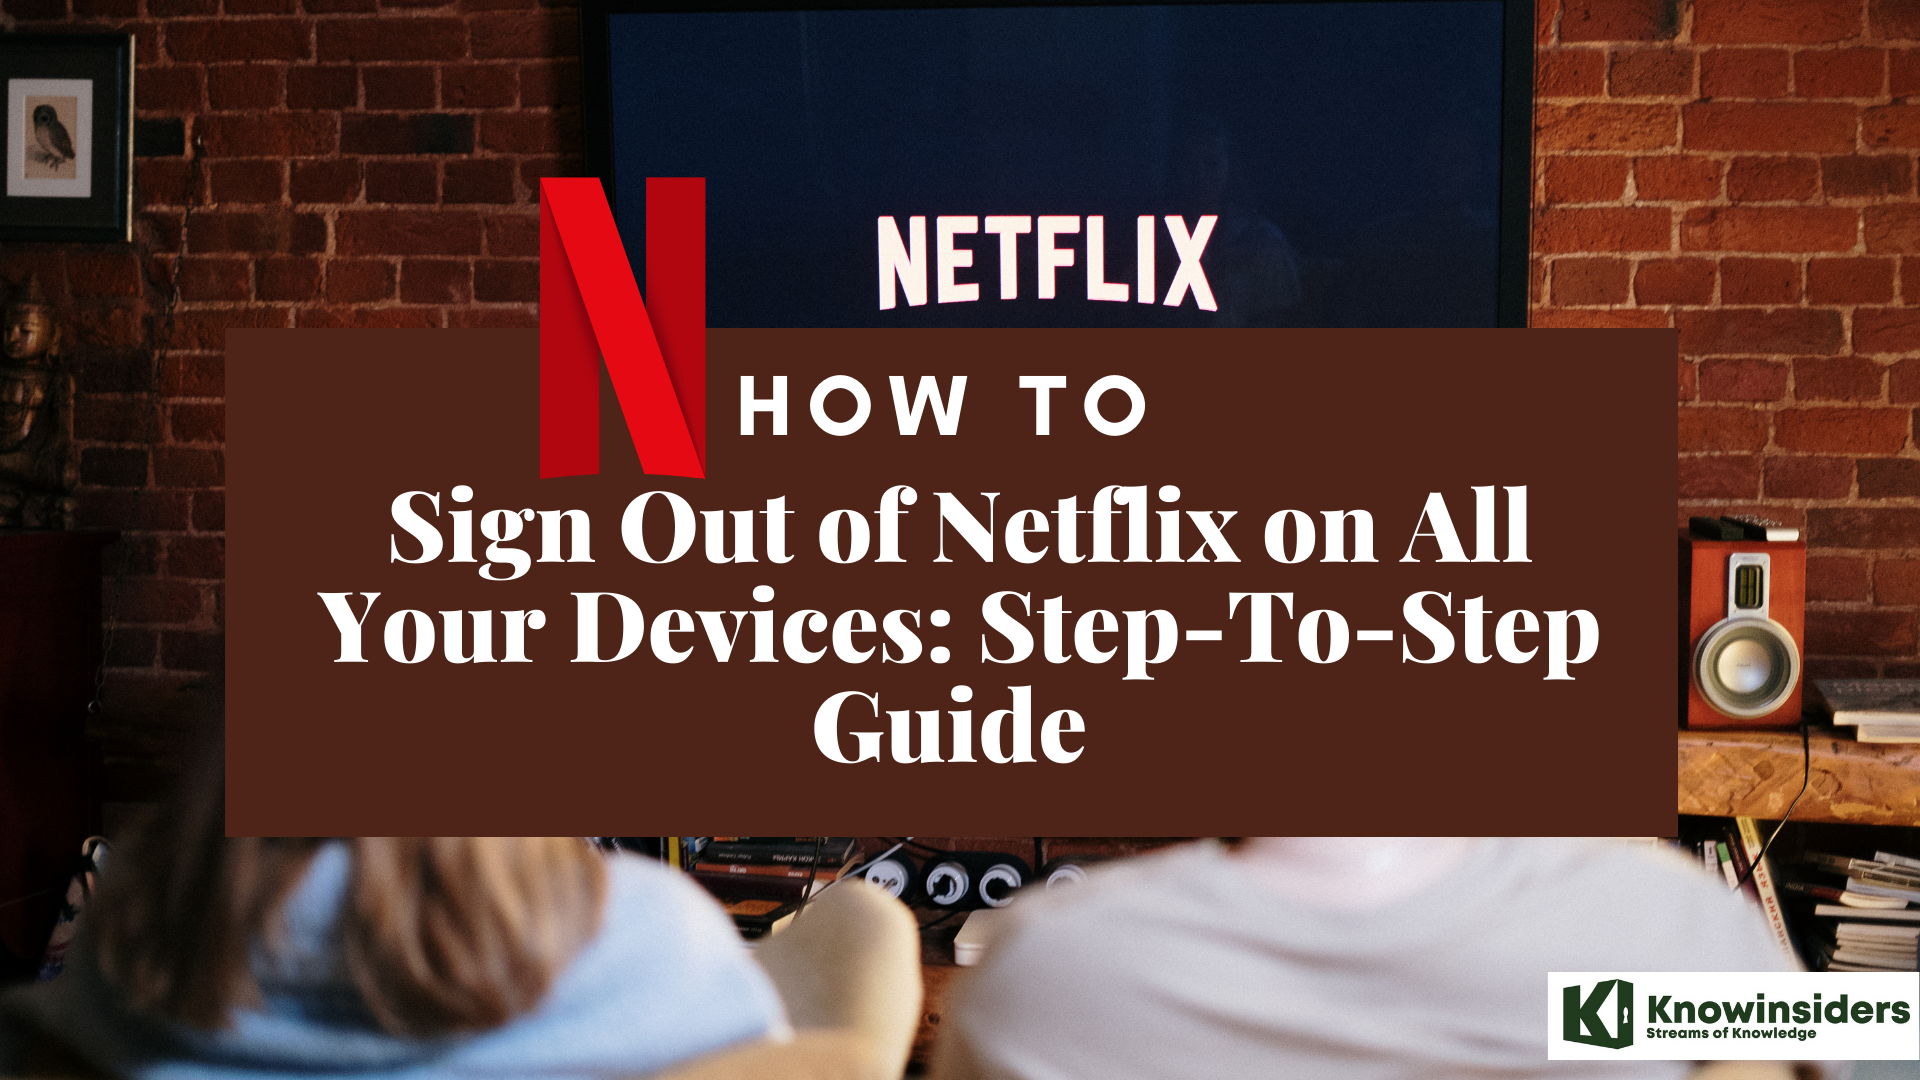 The Simple Ways to Log Out of Netflix on All Devices